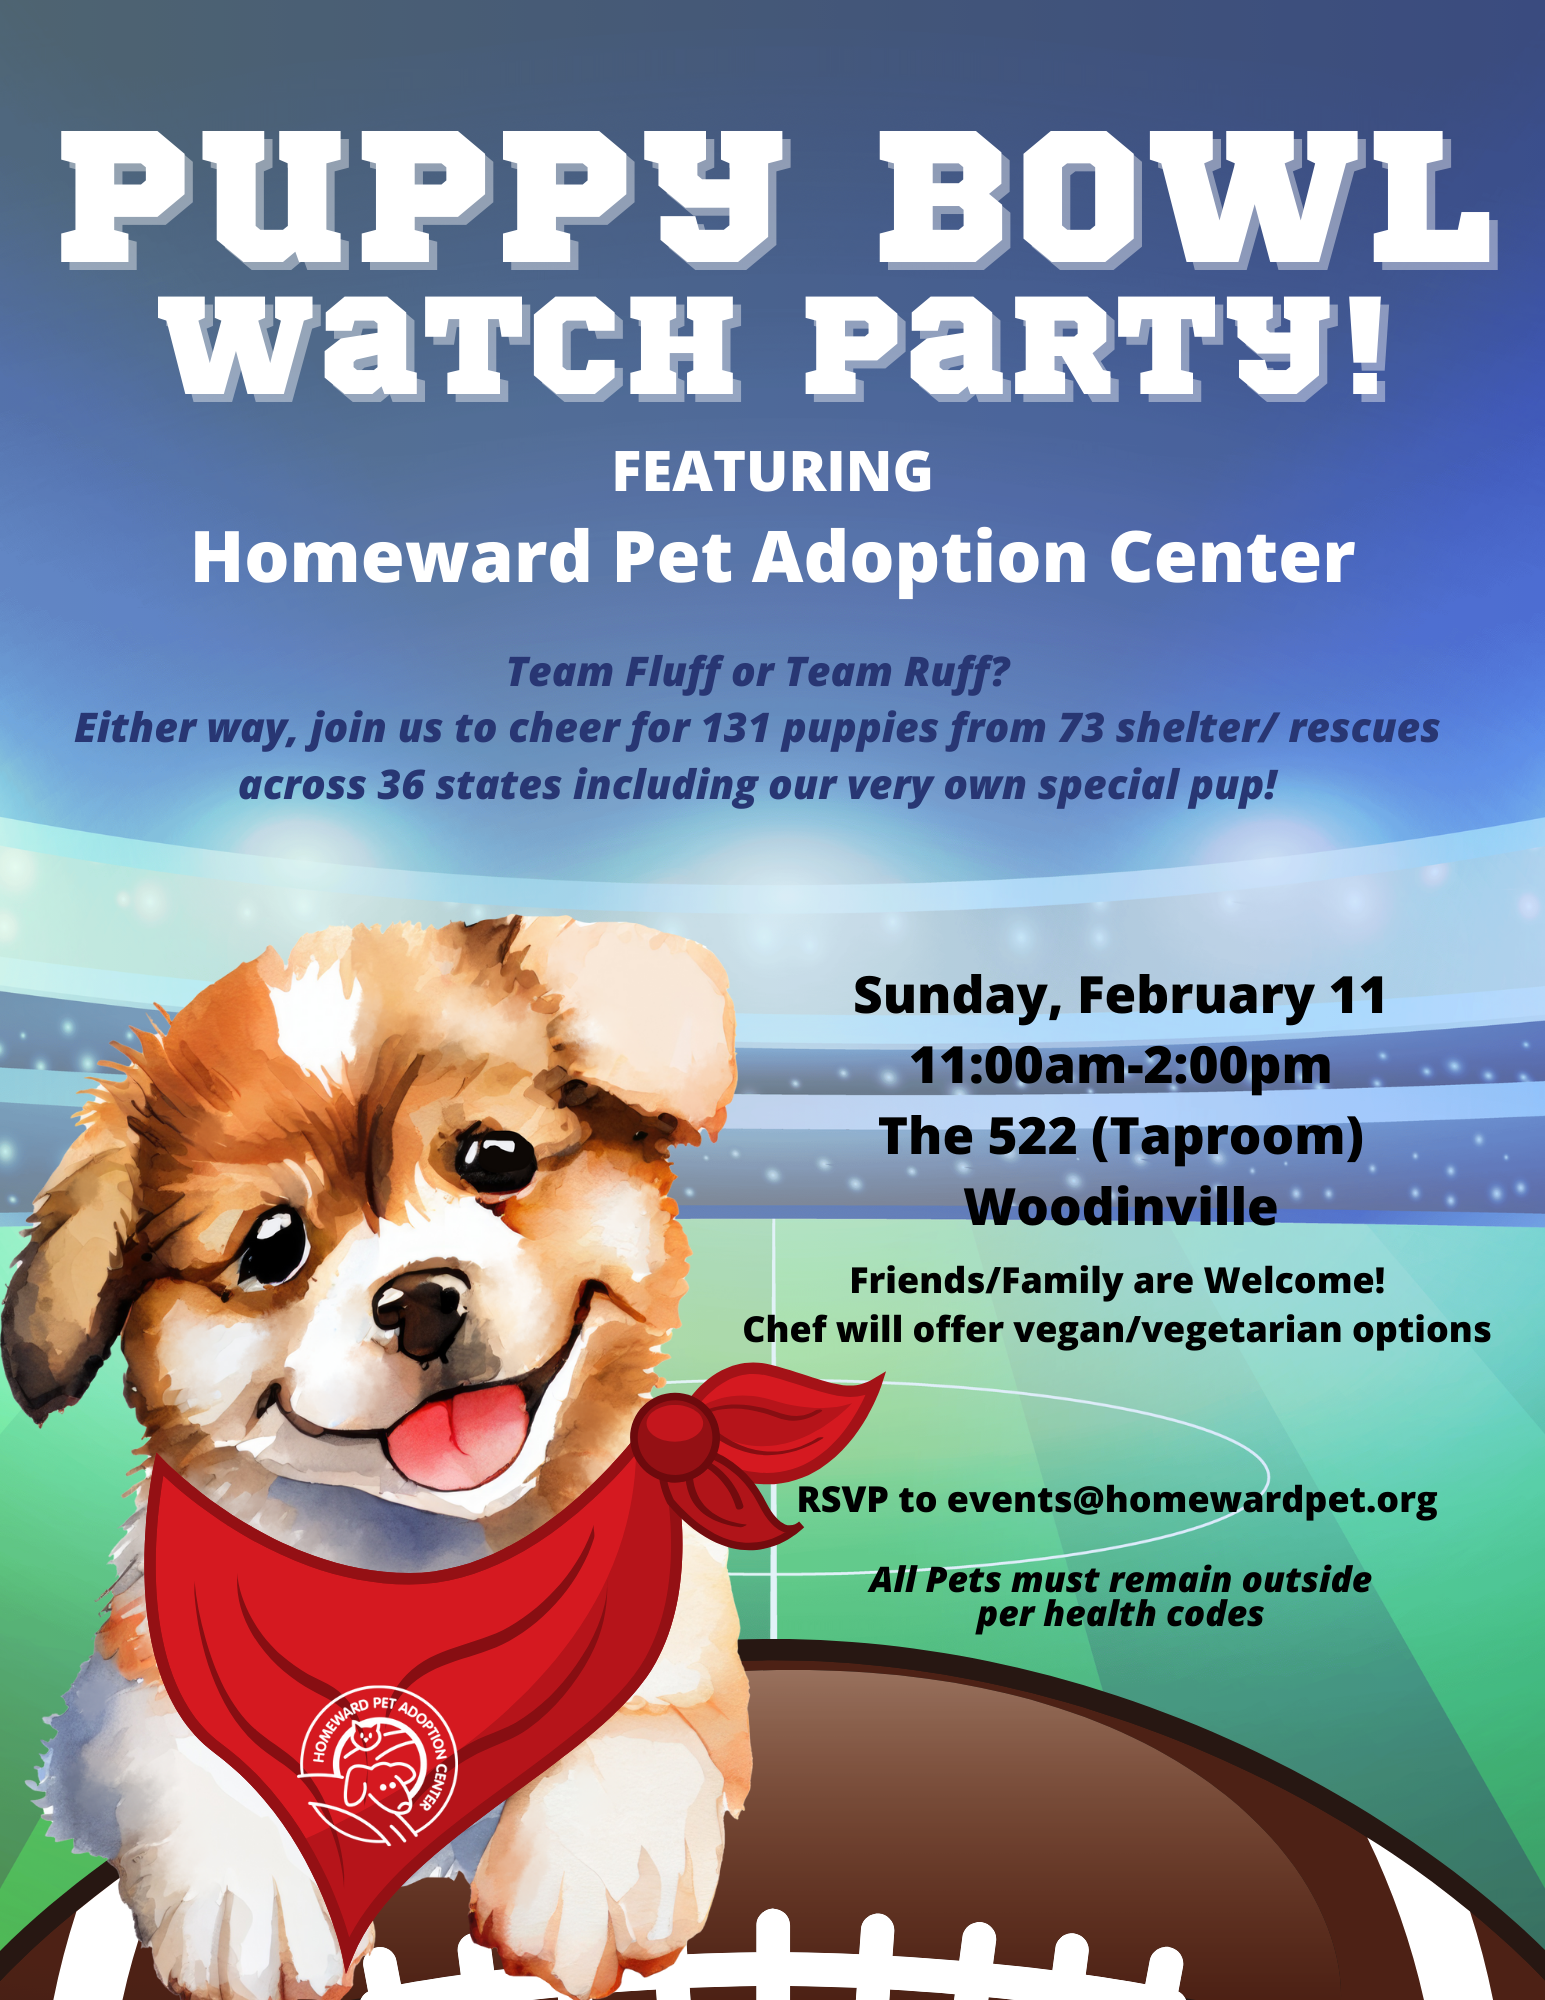 Puppy Bowl Watch Party